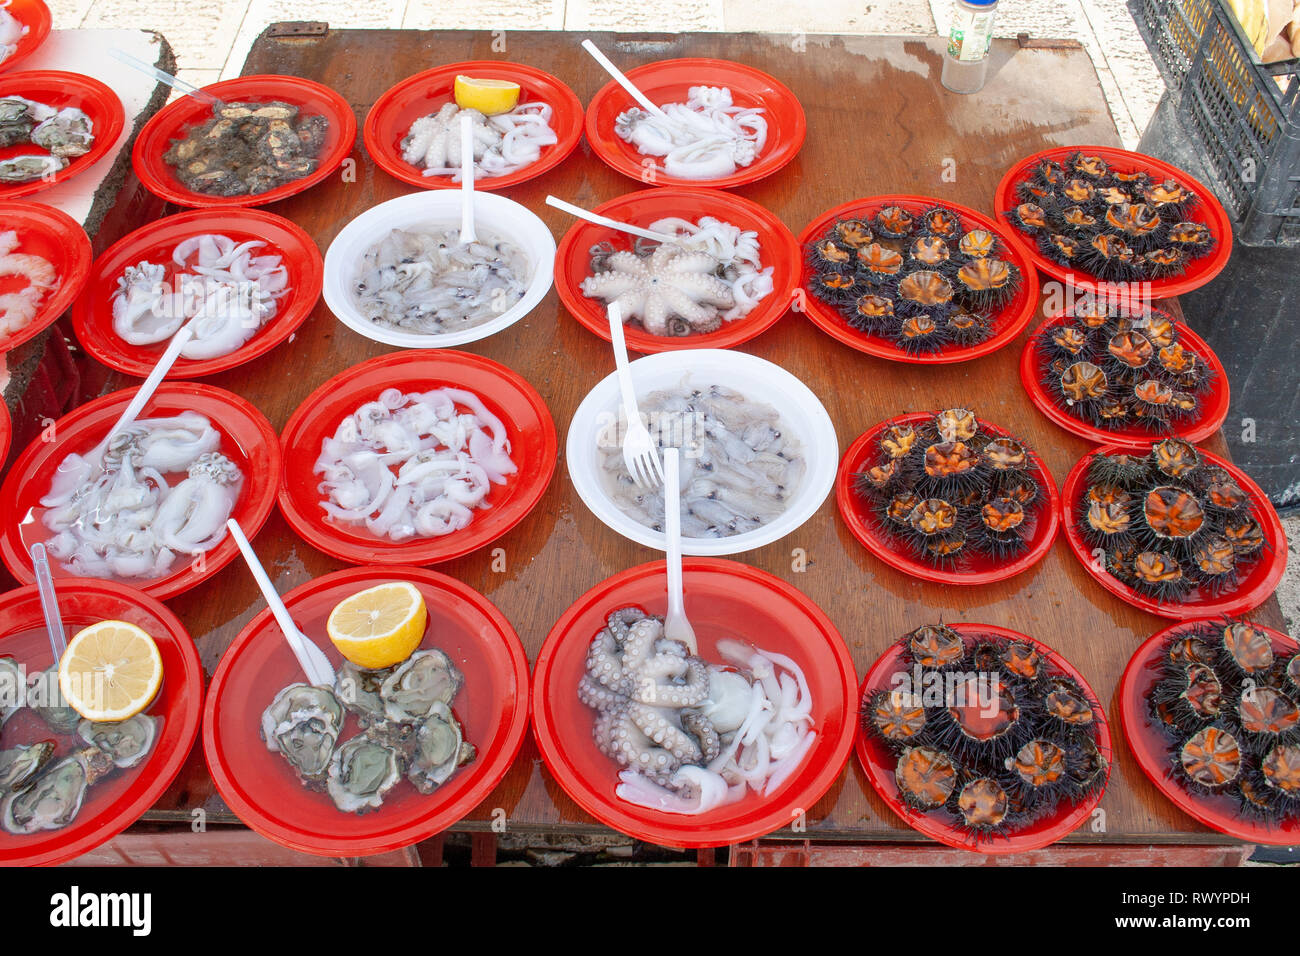 Open air street food fish market on Bari promenade with raw fresh sushi ready to eat: shrimp, oyster, sea urchin, cuttlefish, squid, octopus Stock Photo